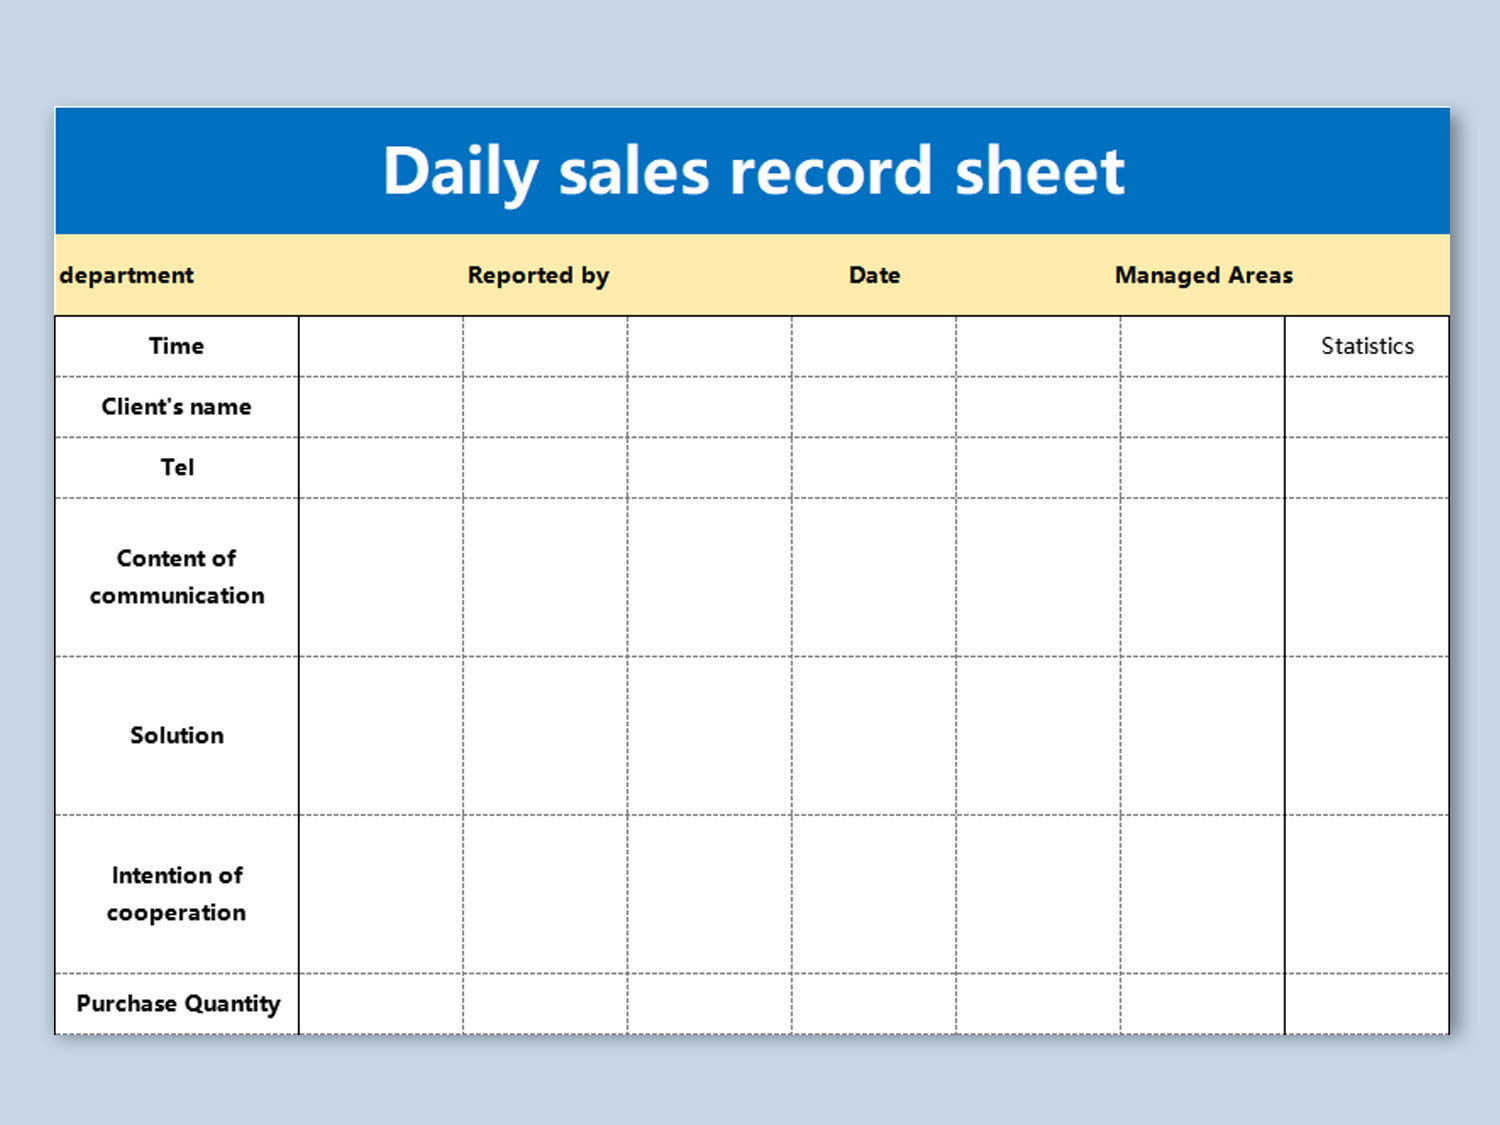 EXCEL of Daily Sales Record Sheet